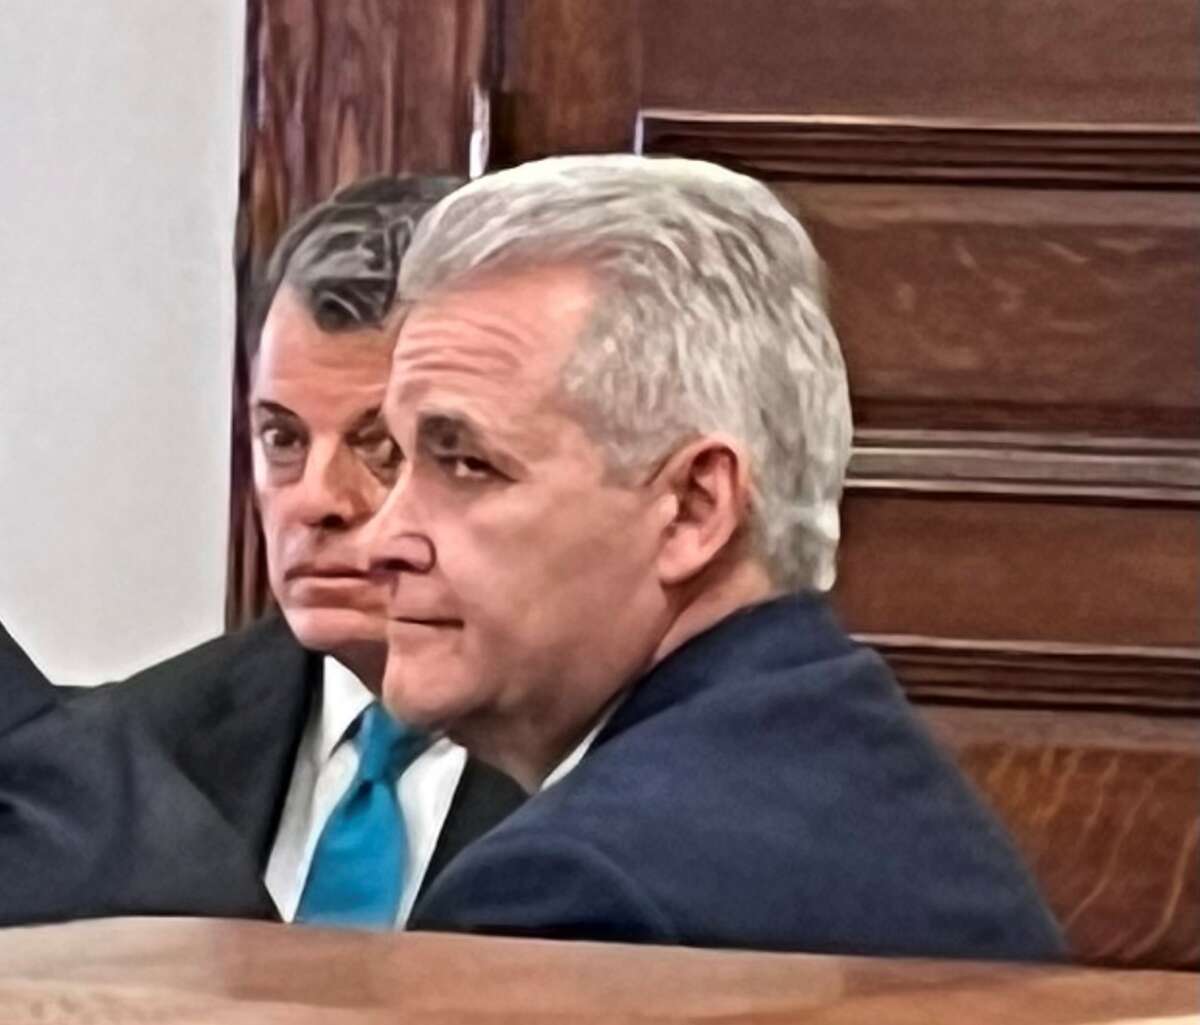 Rensselaer County Executive Steve McLaughlin appears in court during the opening argument Tuesday at his trial in county court.